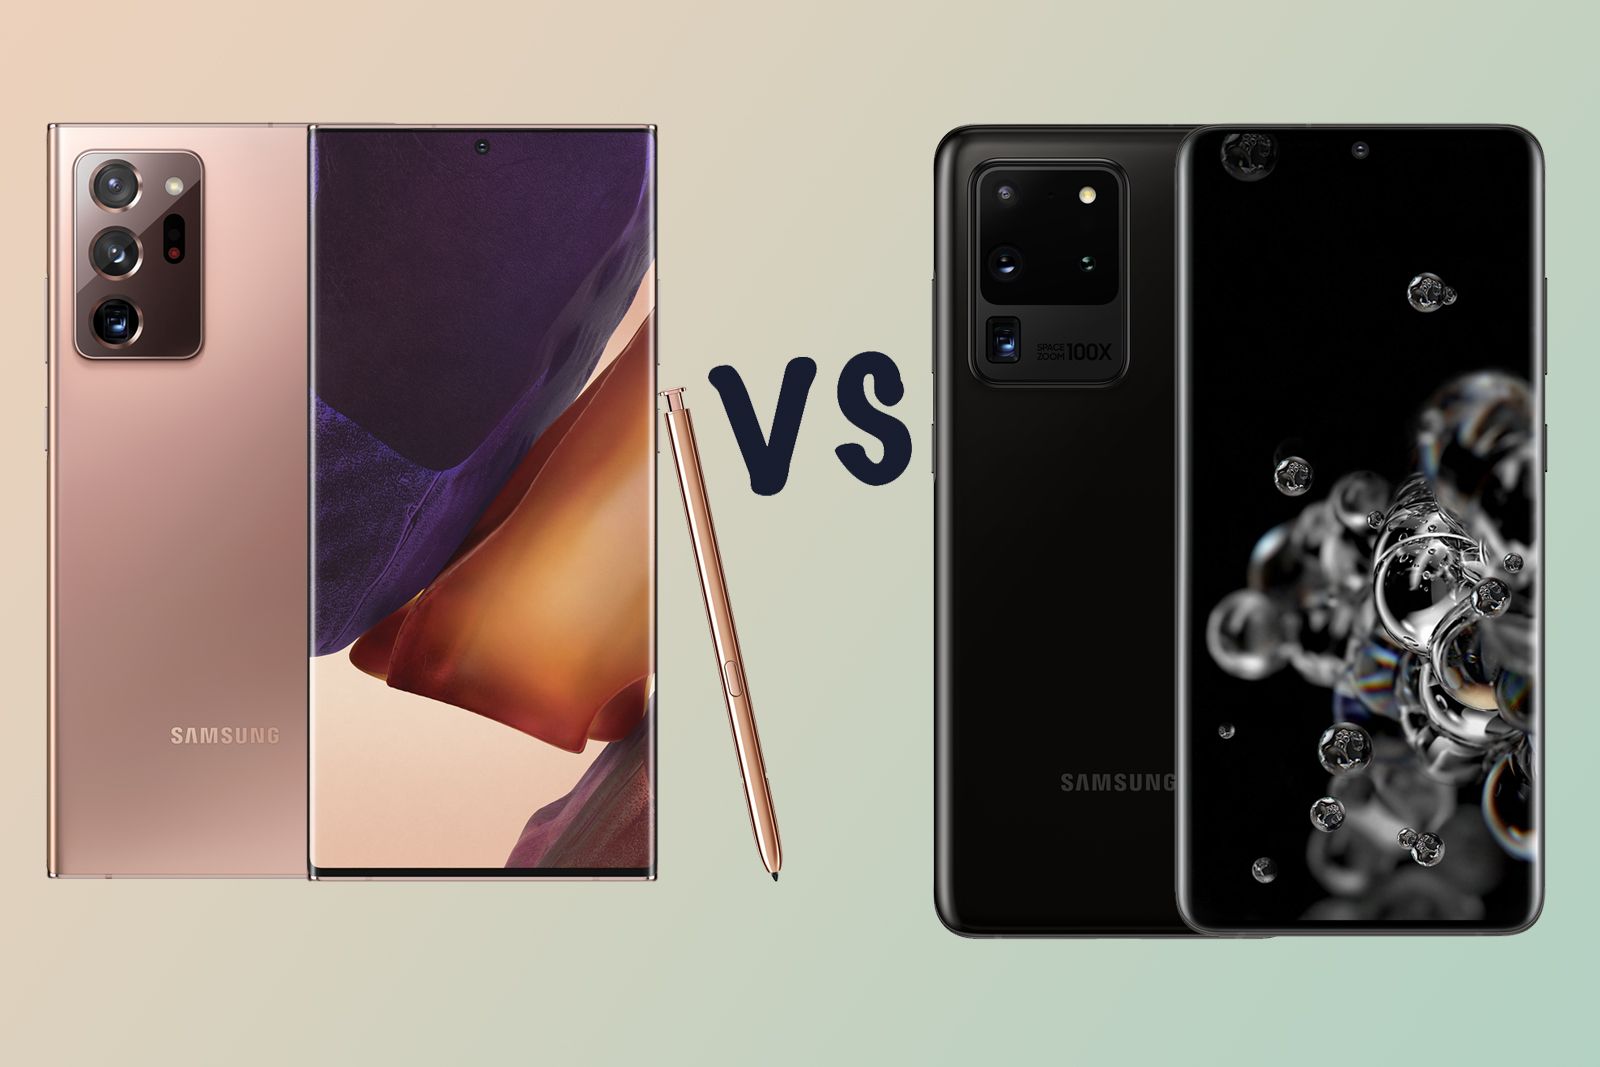 Samsung Galaxy Note 20 Ultra vs S20 Ultra: Which ultimate flagship